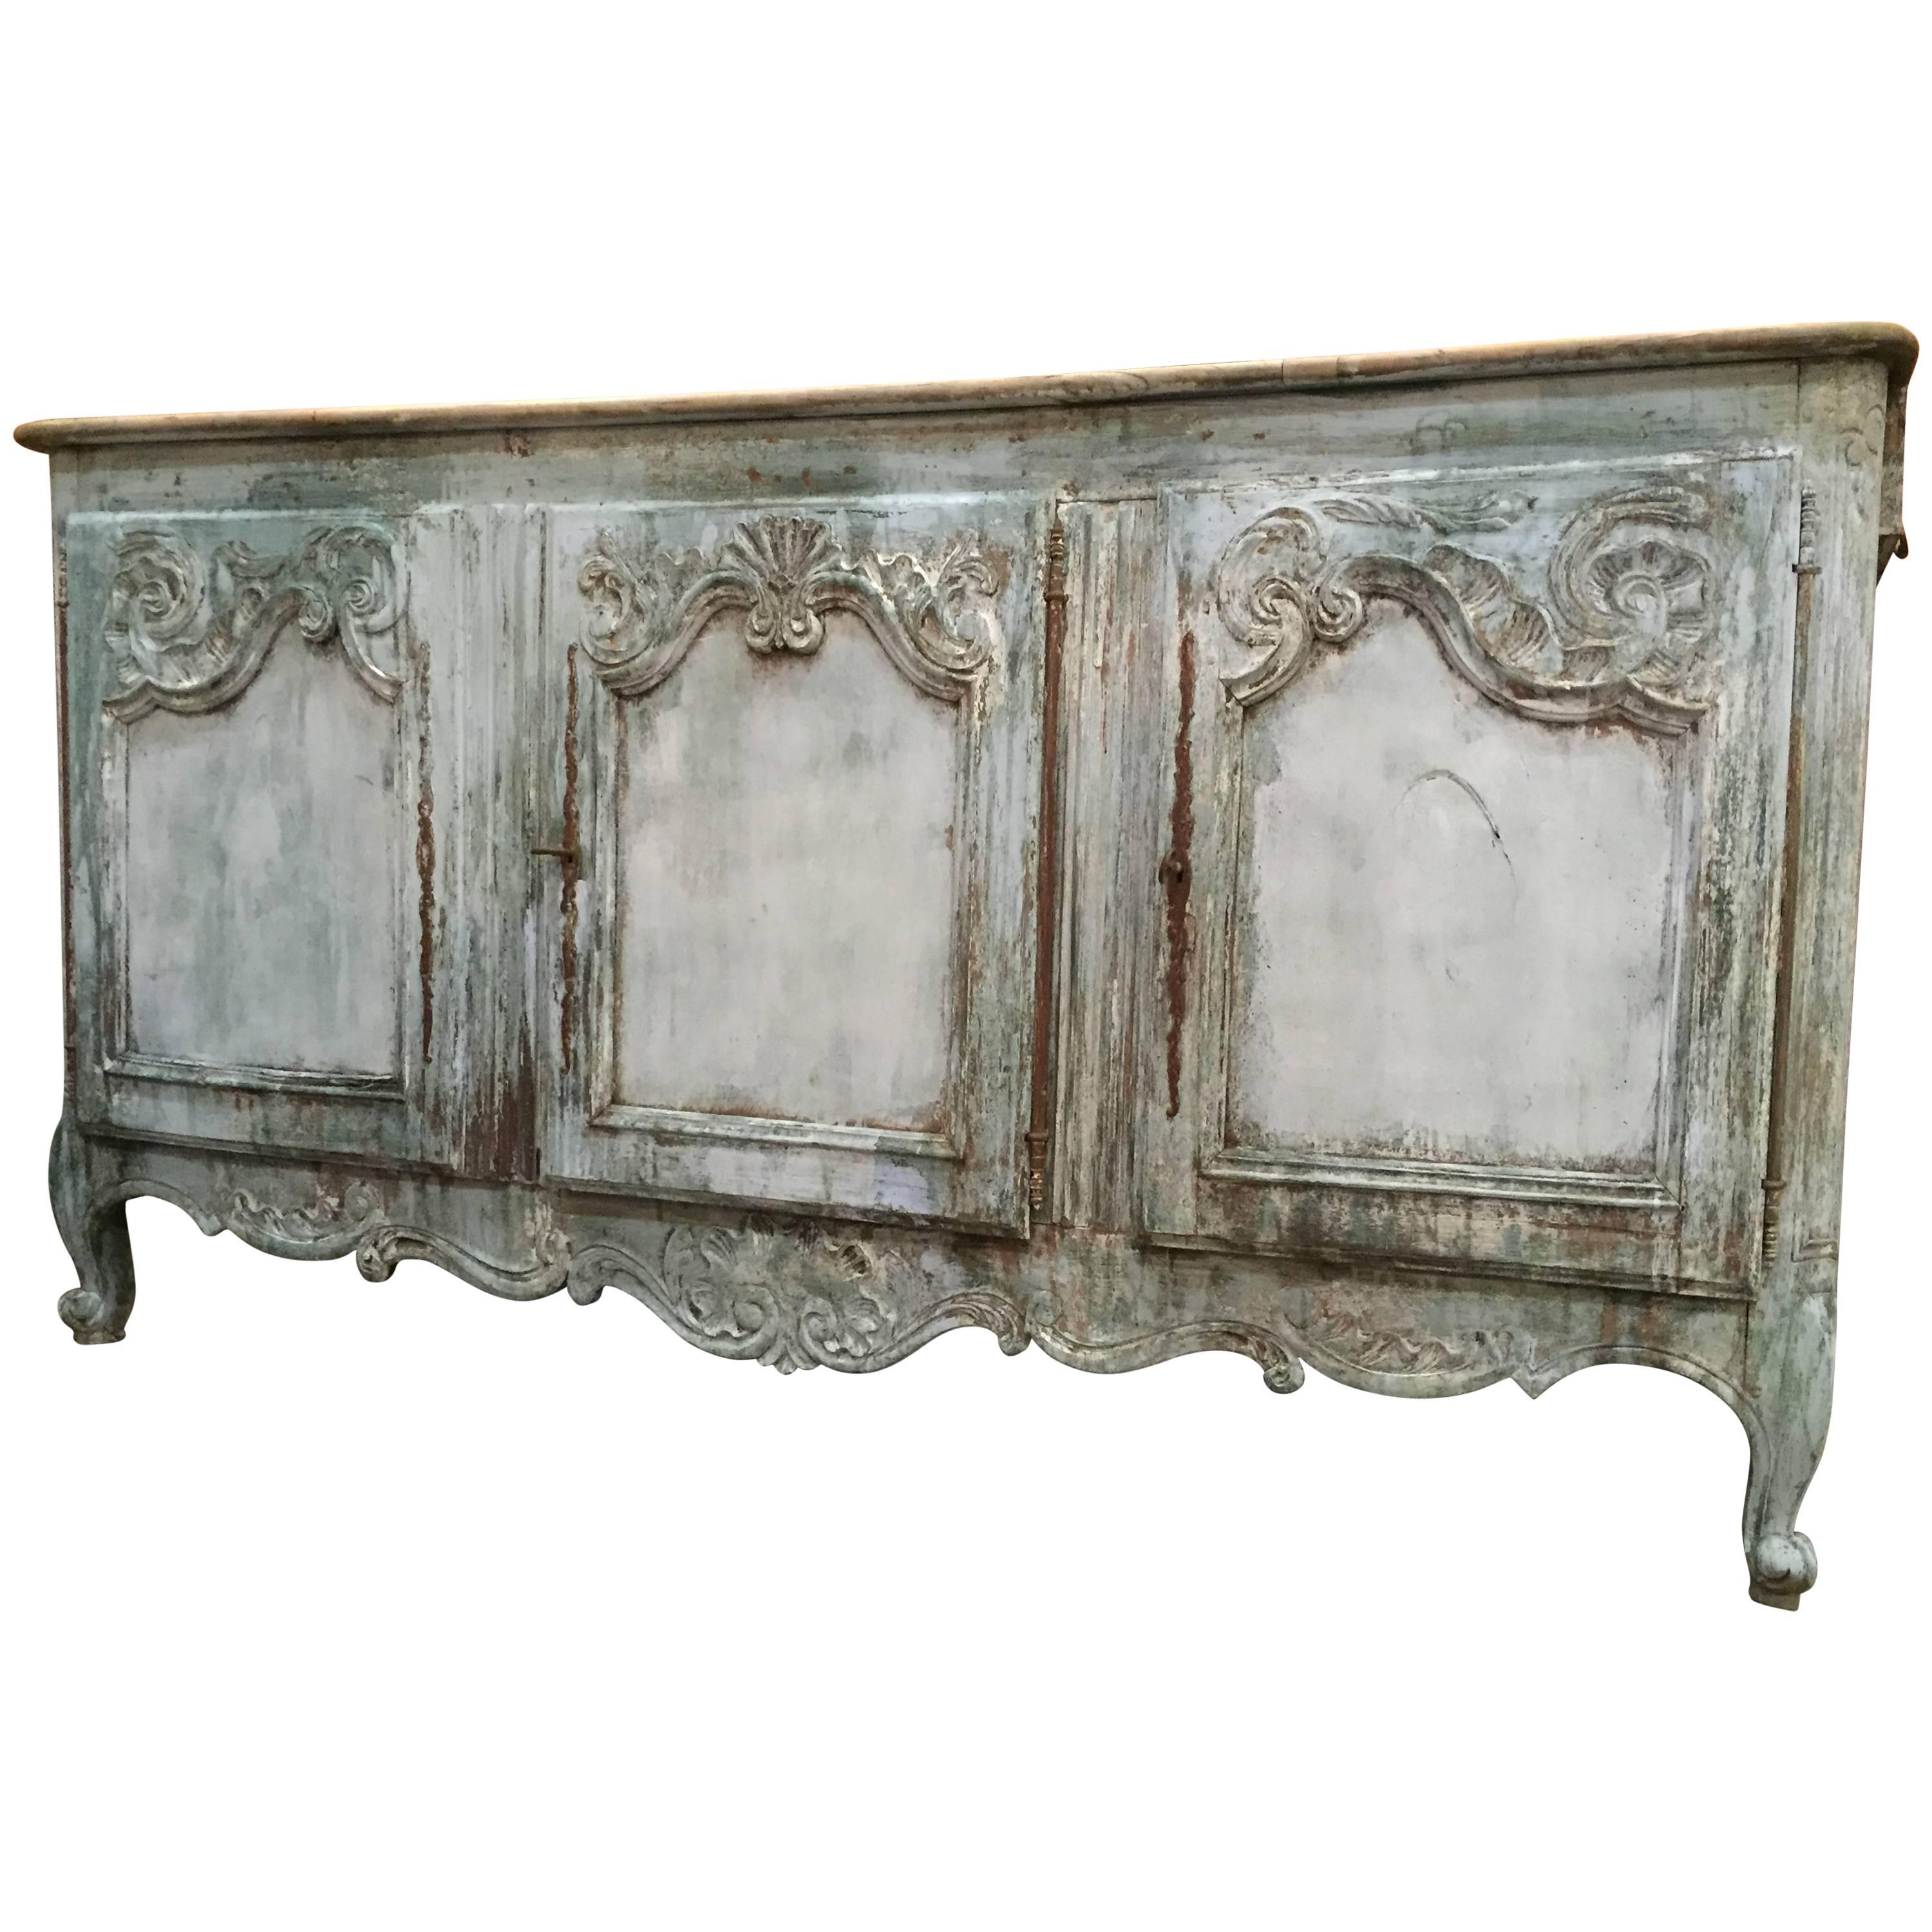 French Provencal 19th Century Painted Enfilade Buffet